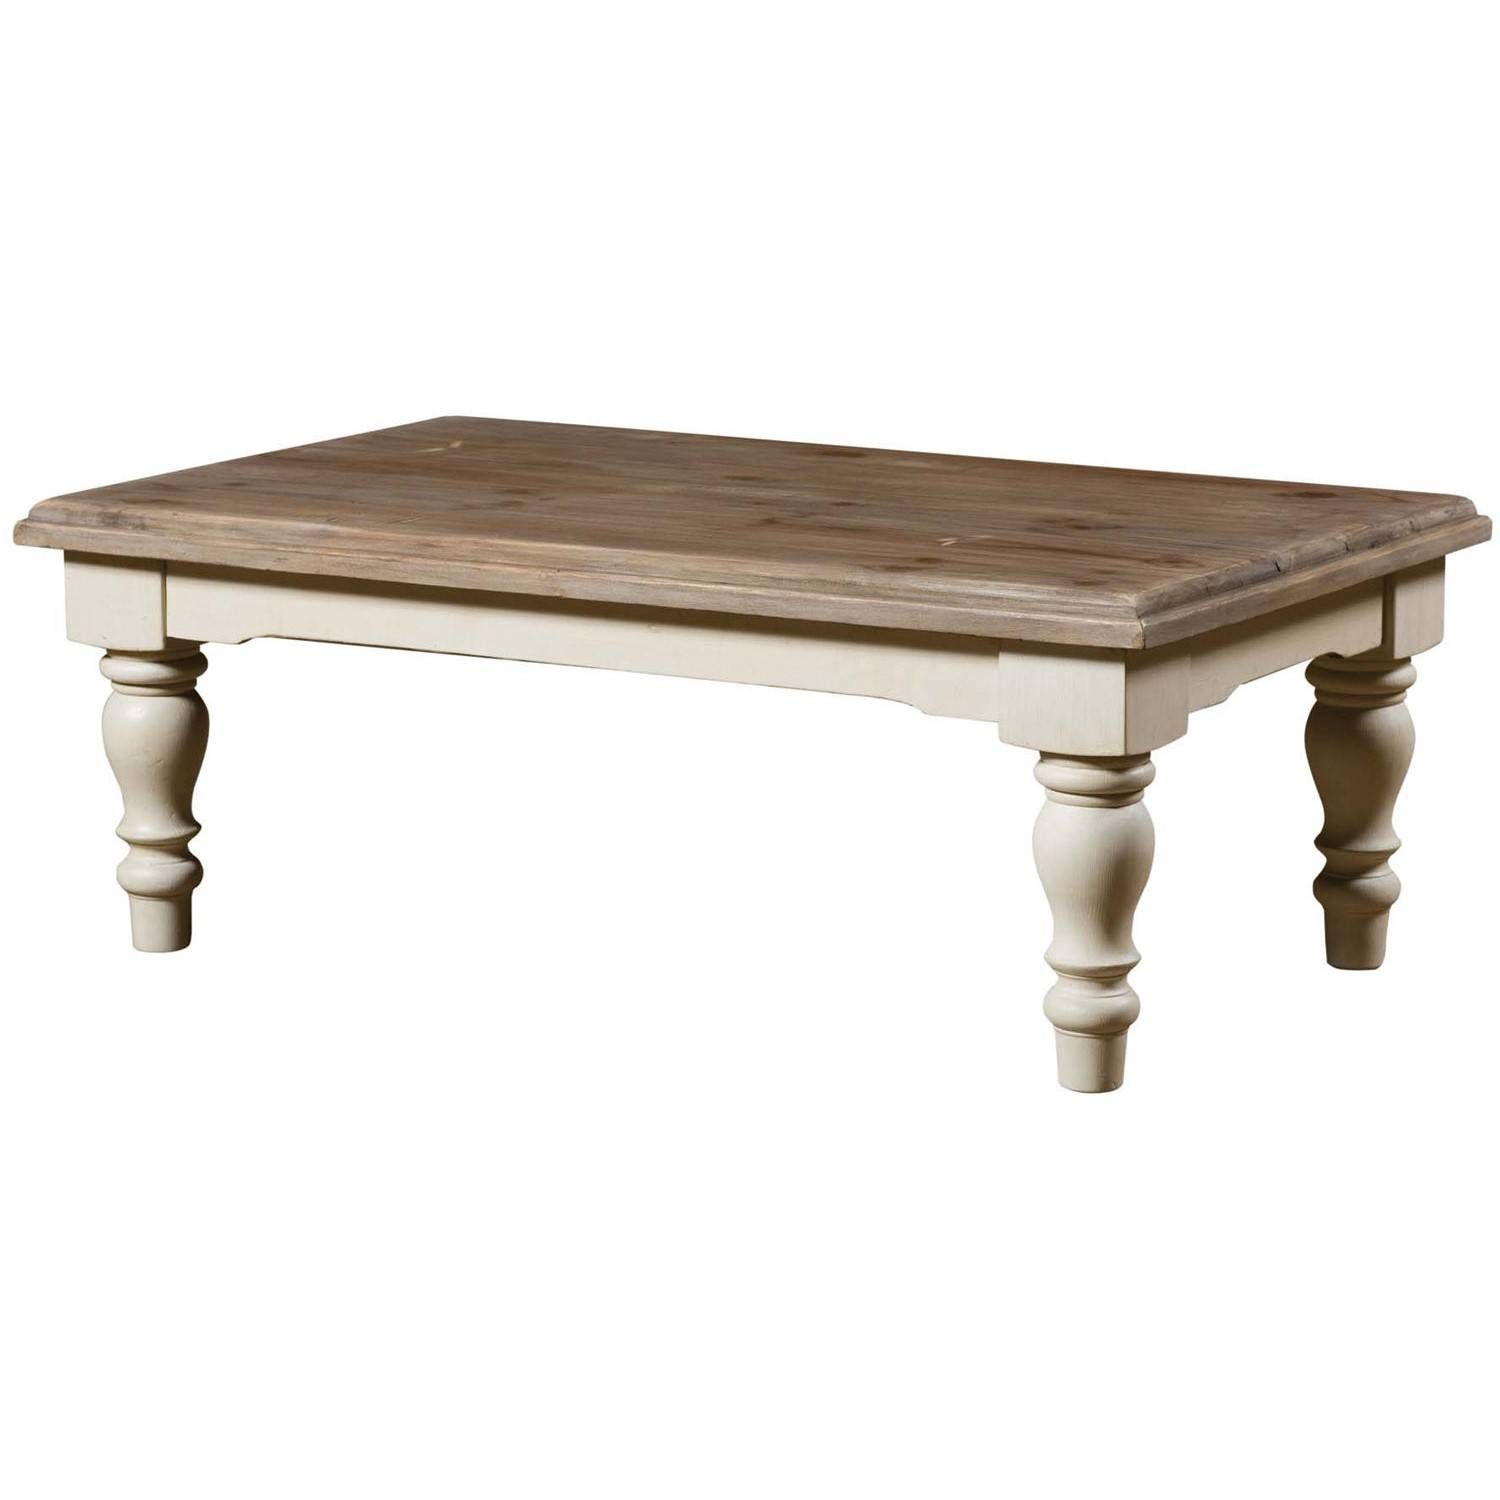 Furniture. French Country Coffee Table Ideas: Natural Wooden Top Within Country French Coffee Tables (Photo 5 of 30)